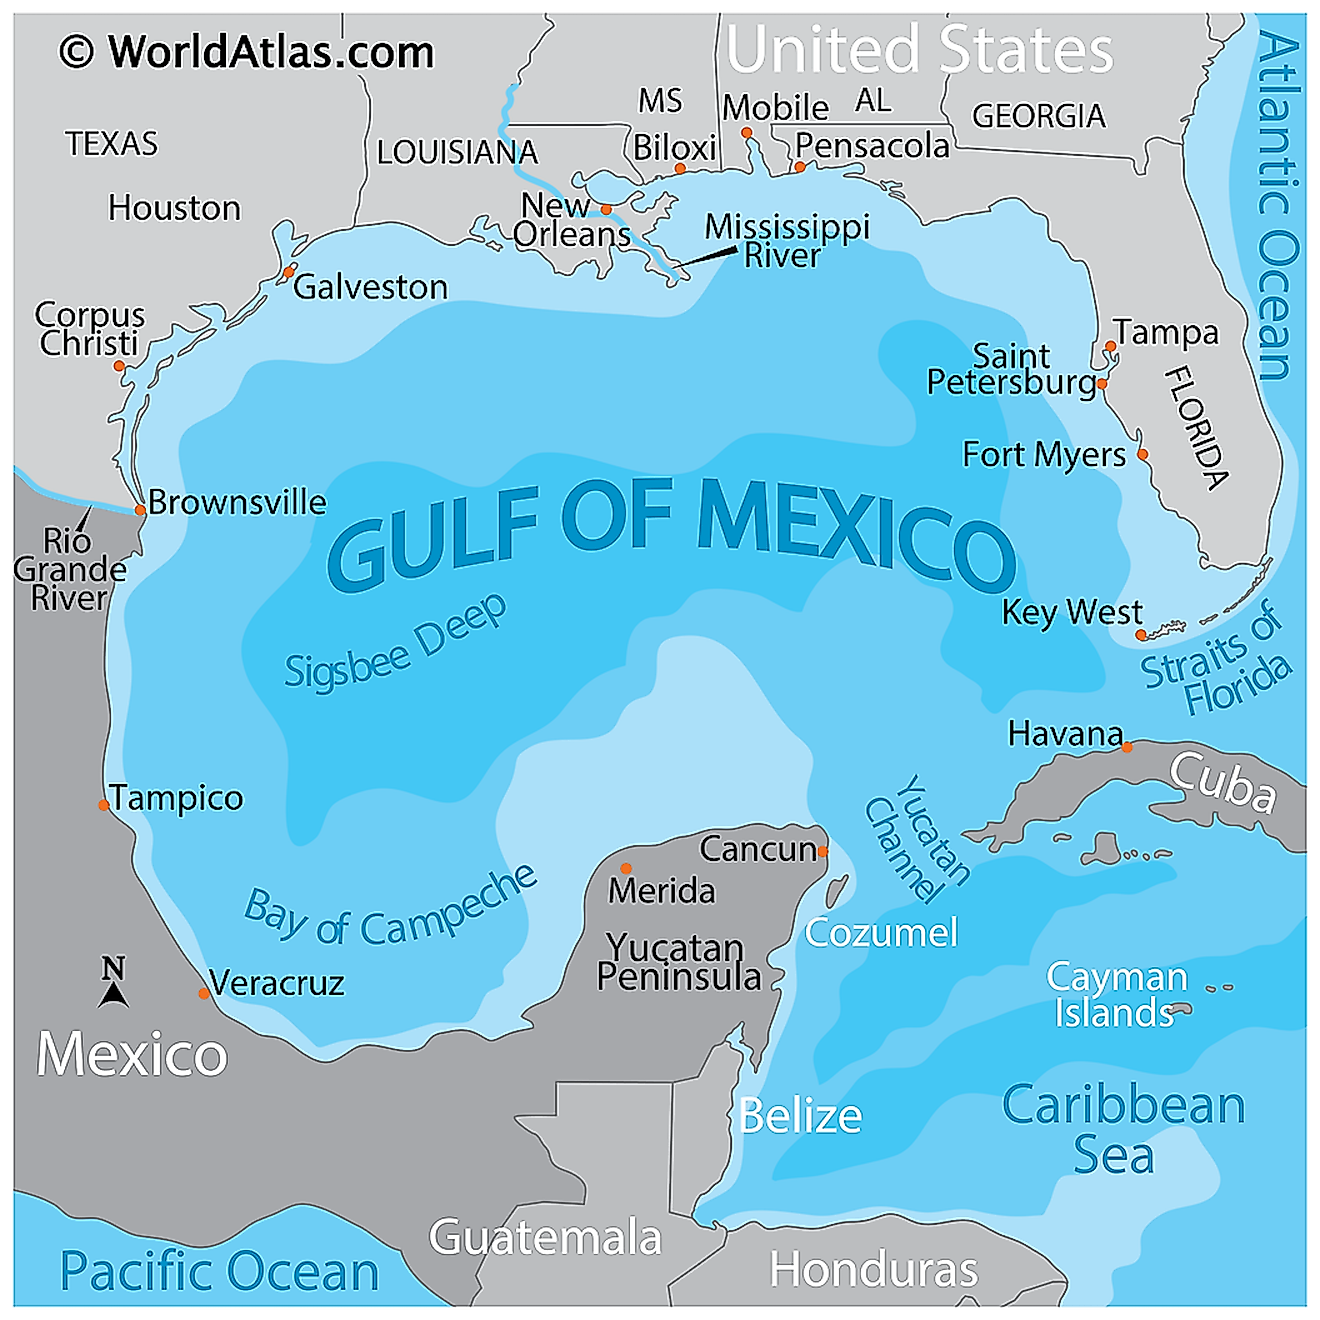 The Sigsbee Deep is located in the Gulf of Mexico Basin and is the deepest part of the basin.